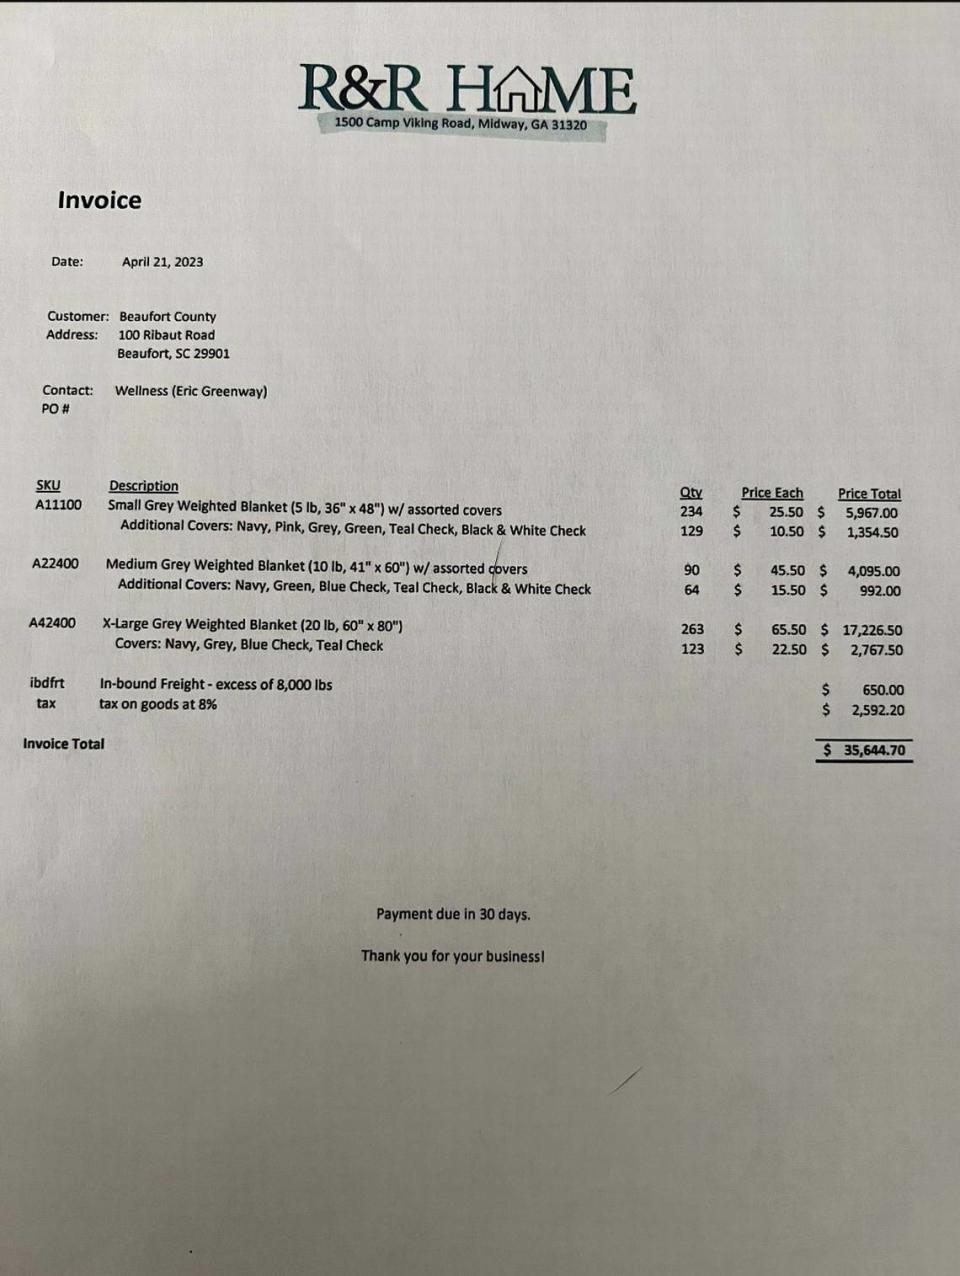 The April 21 invoice for $35,644.70 worth of Blankets. Provided